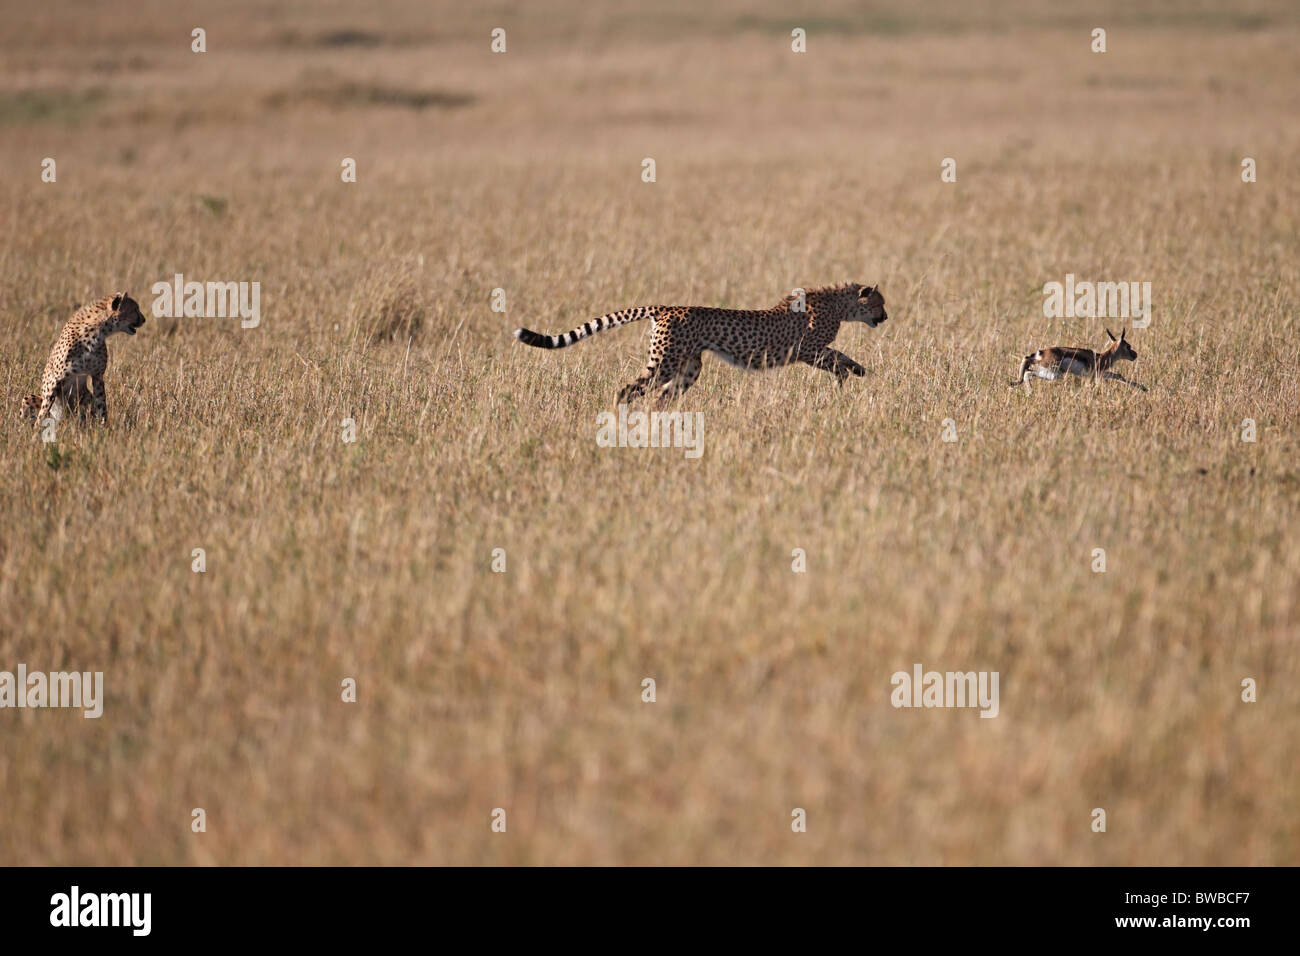 Cheetah cubs are trained by their mother, hunting skills. Stock Photo